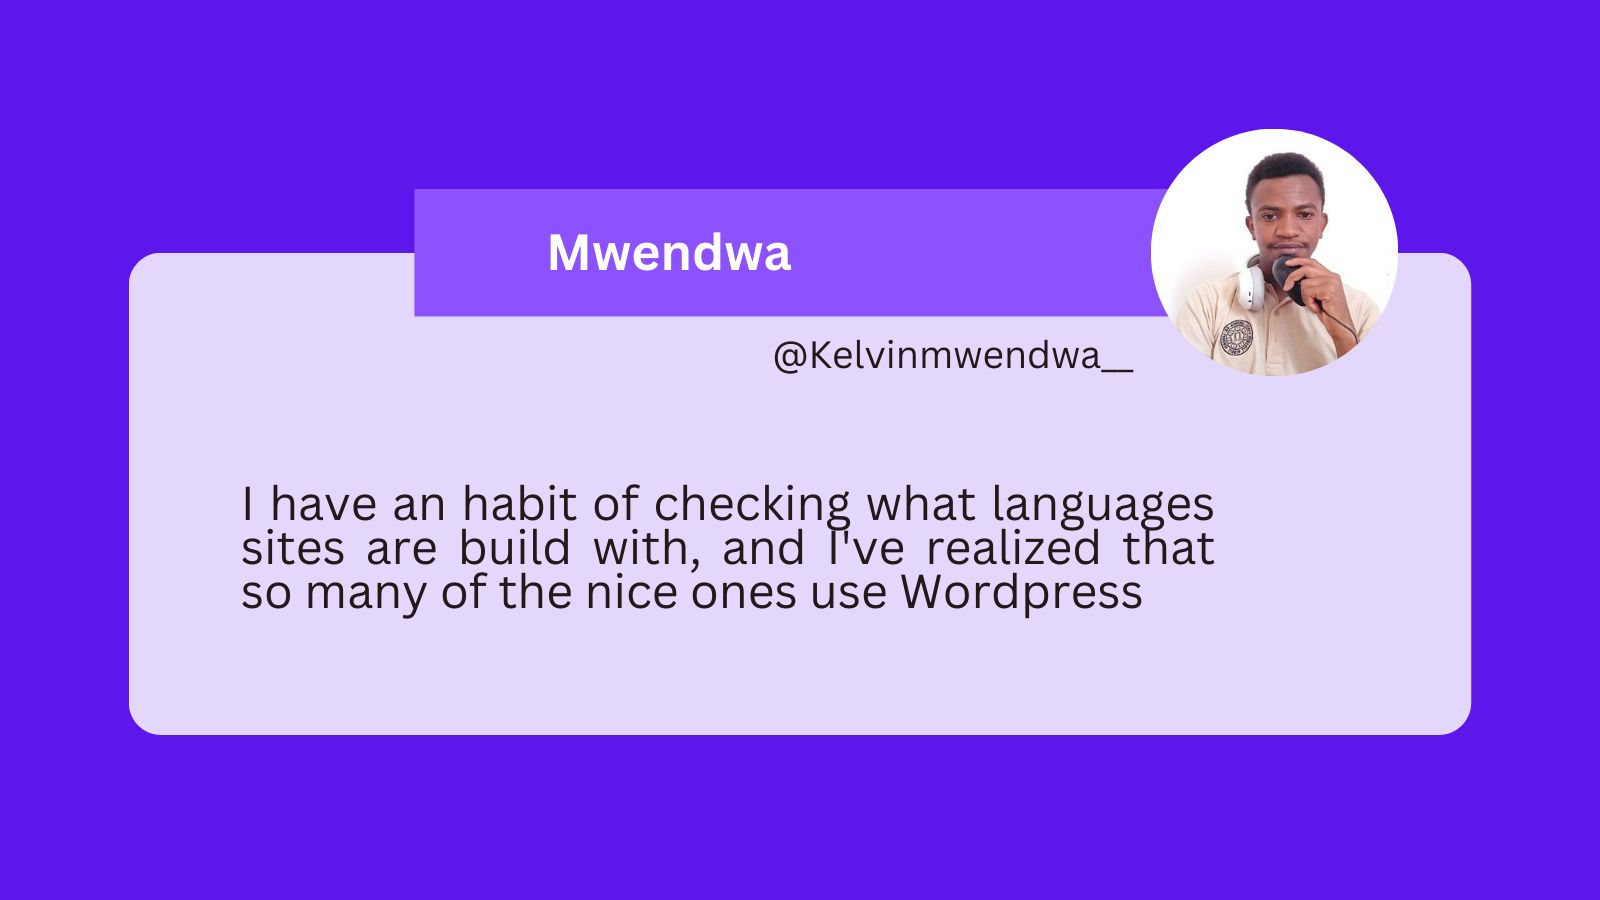 A tweet from Kelvin Mwendwa saying: I have an habit of checking what languages sites are build with, and I've realized that so many of the nice ones use Wordpress